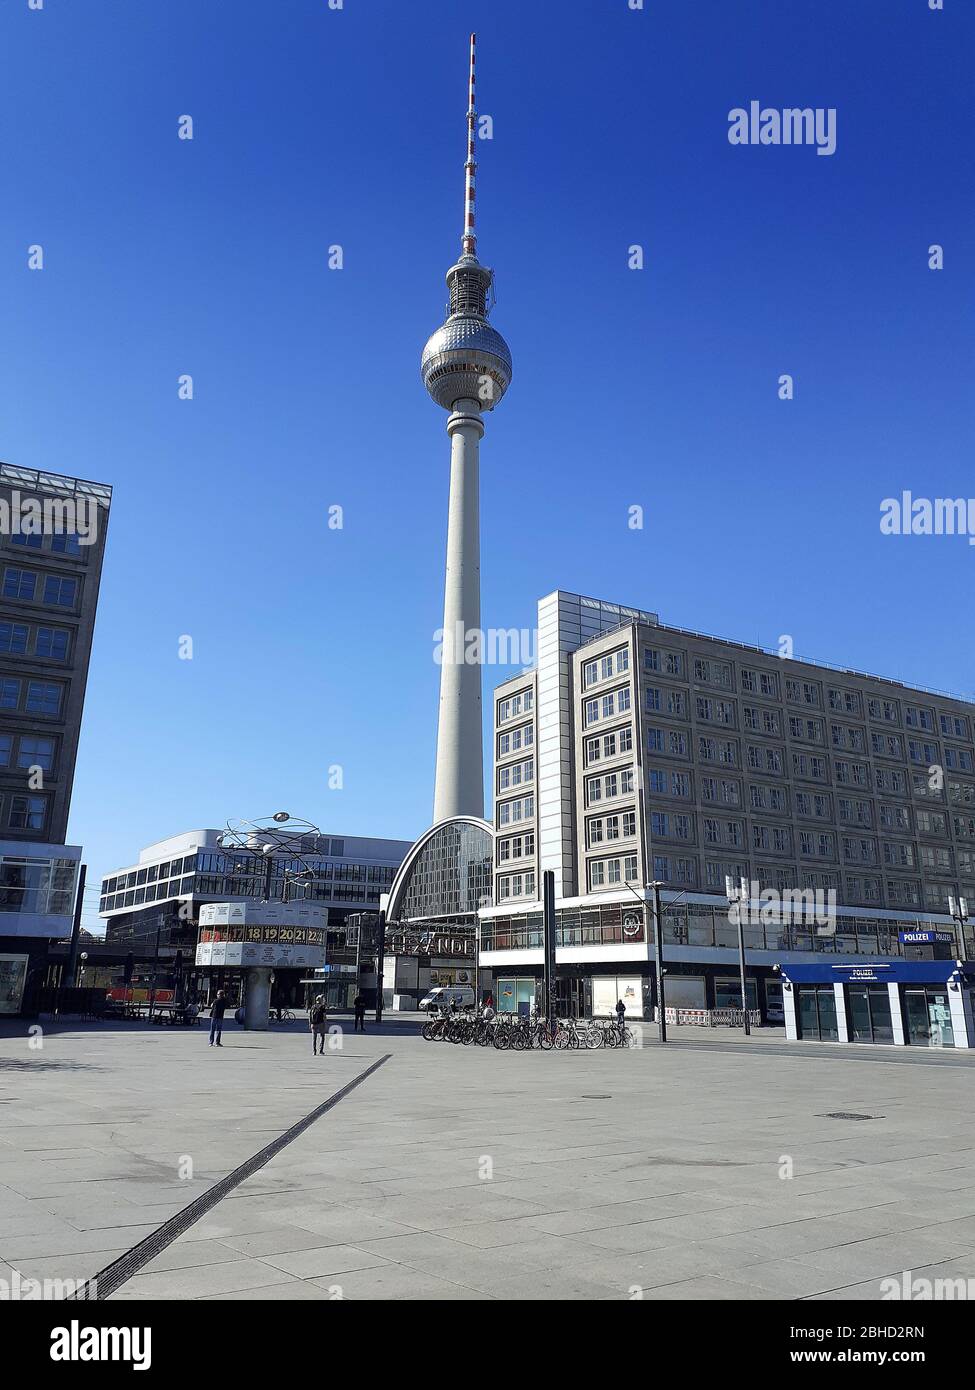 A deserted Alexanderplatz showing the World Clock, usually a meeting place, during the lock-down due to the Coronavirus pandemic, April 2020, Berlin, Germany Stock Photo